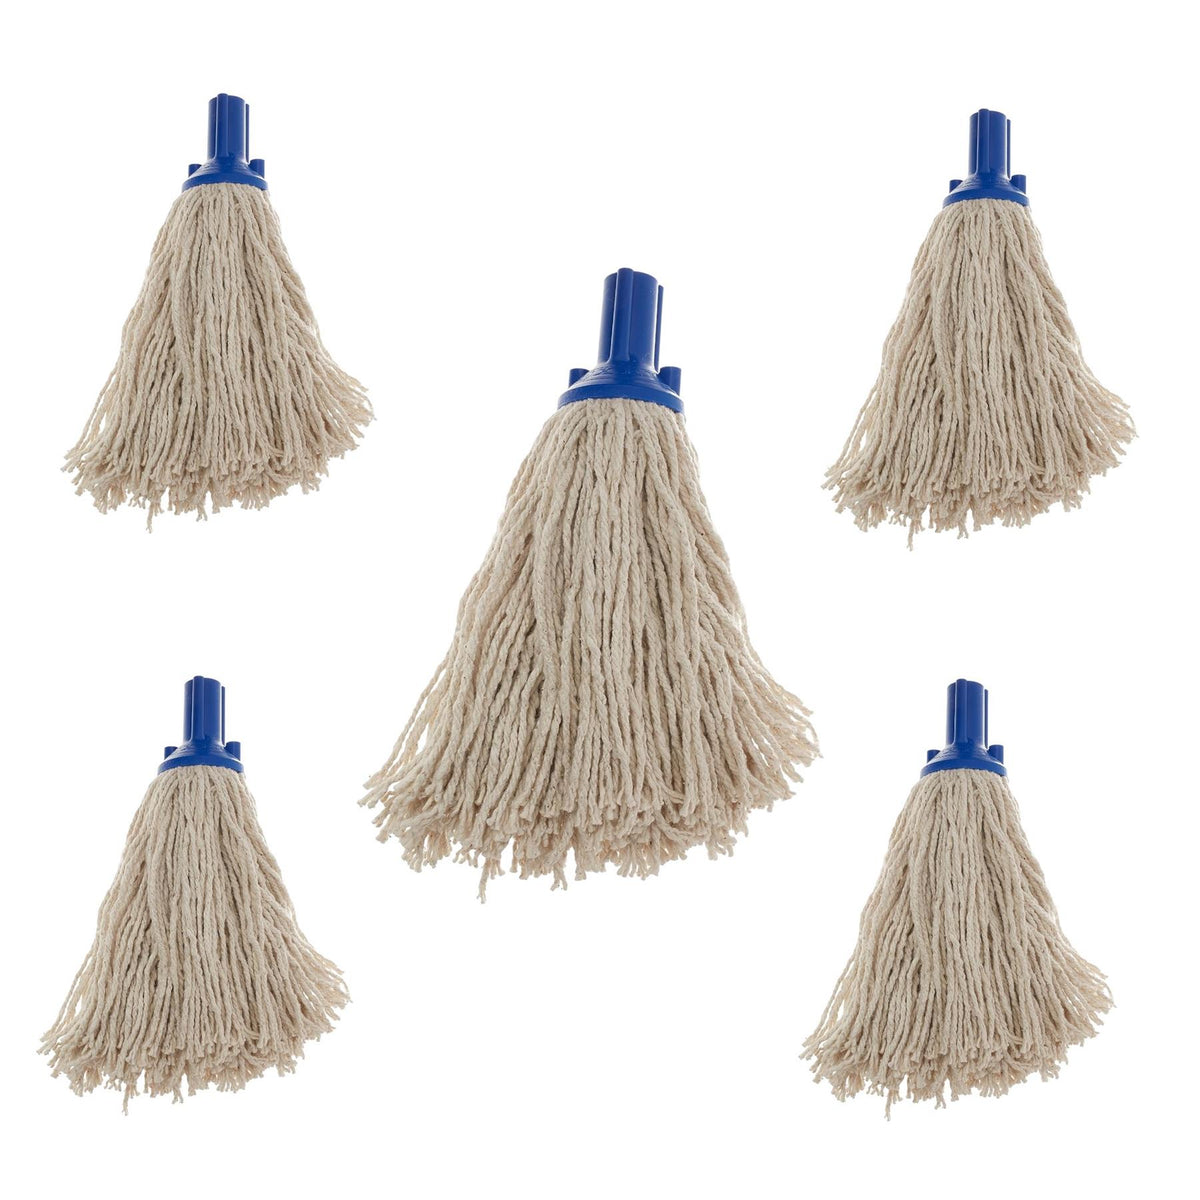 Exel Cotton Mop Heads 250 grams Pack of 5 Blue